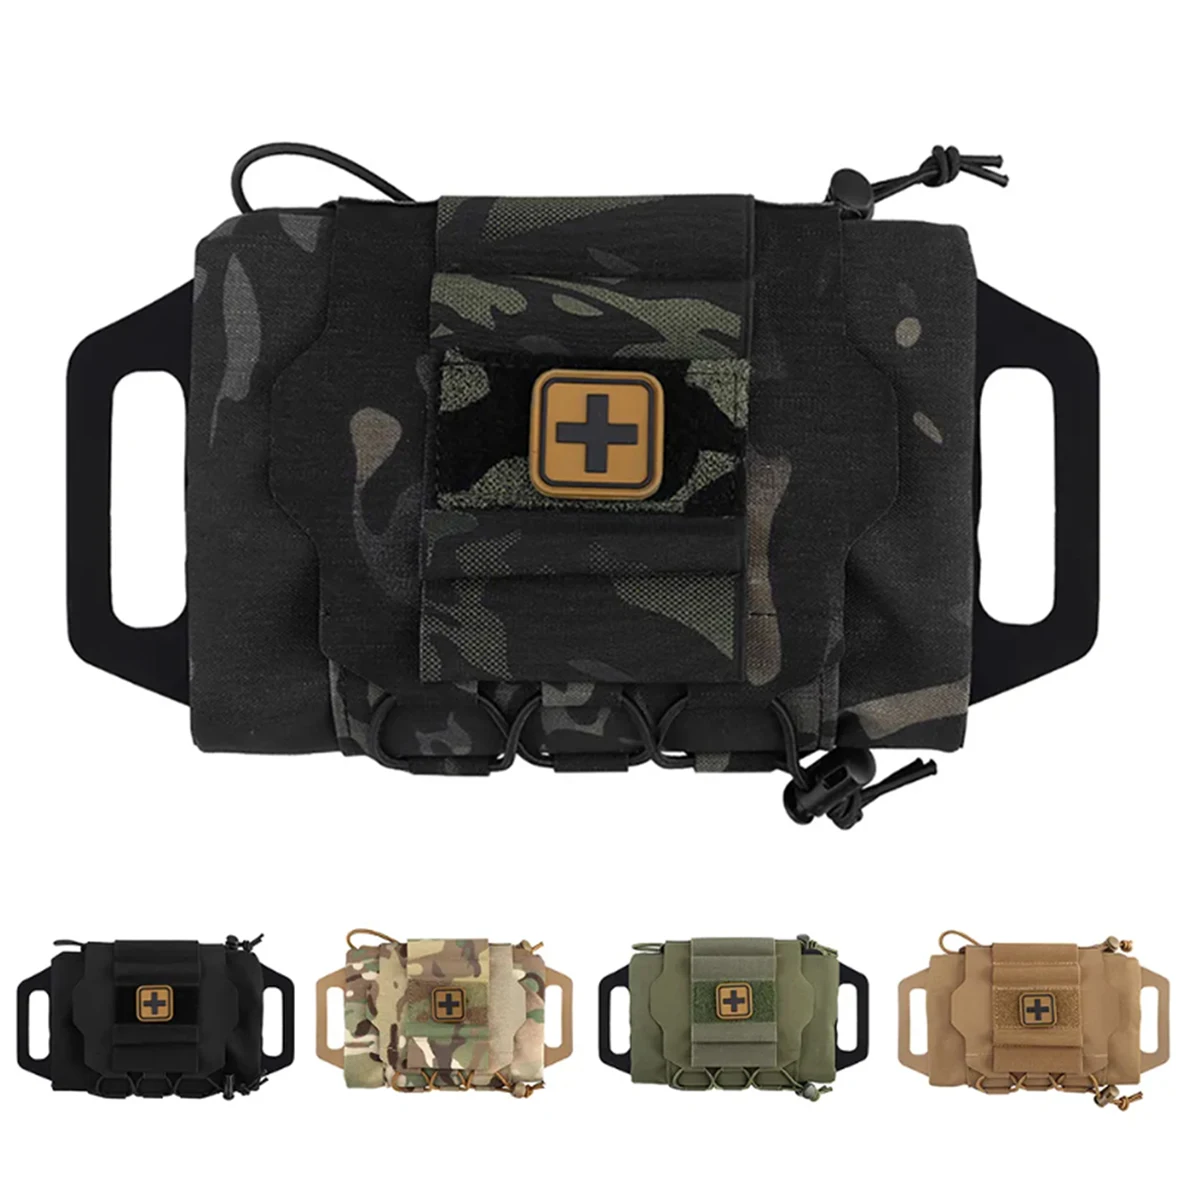 

New Tactical Waist Bag Military Molle Rapid Deployment First Aid Kit Outdoor Hunting Emergency Camping Medical Kits Survival